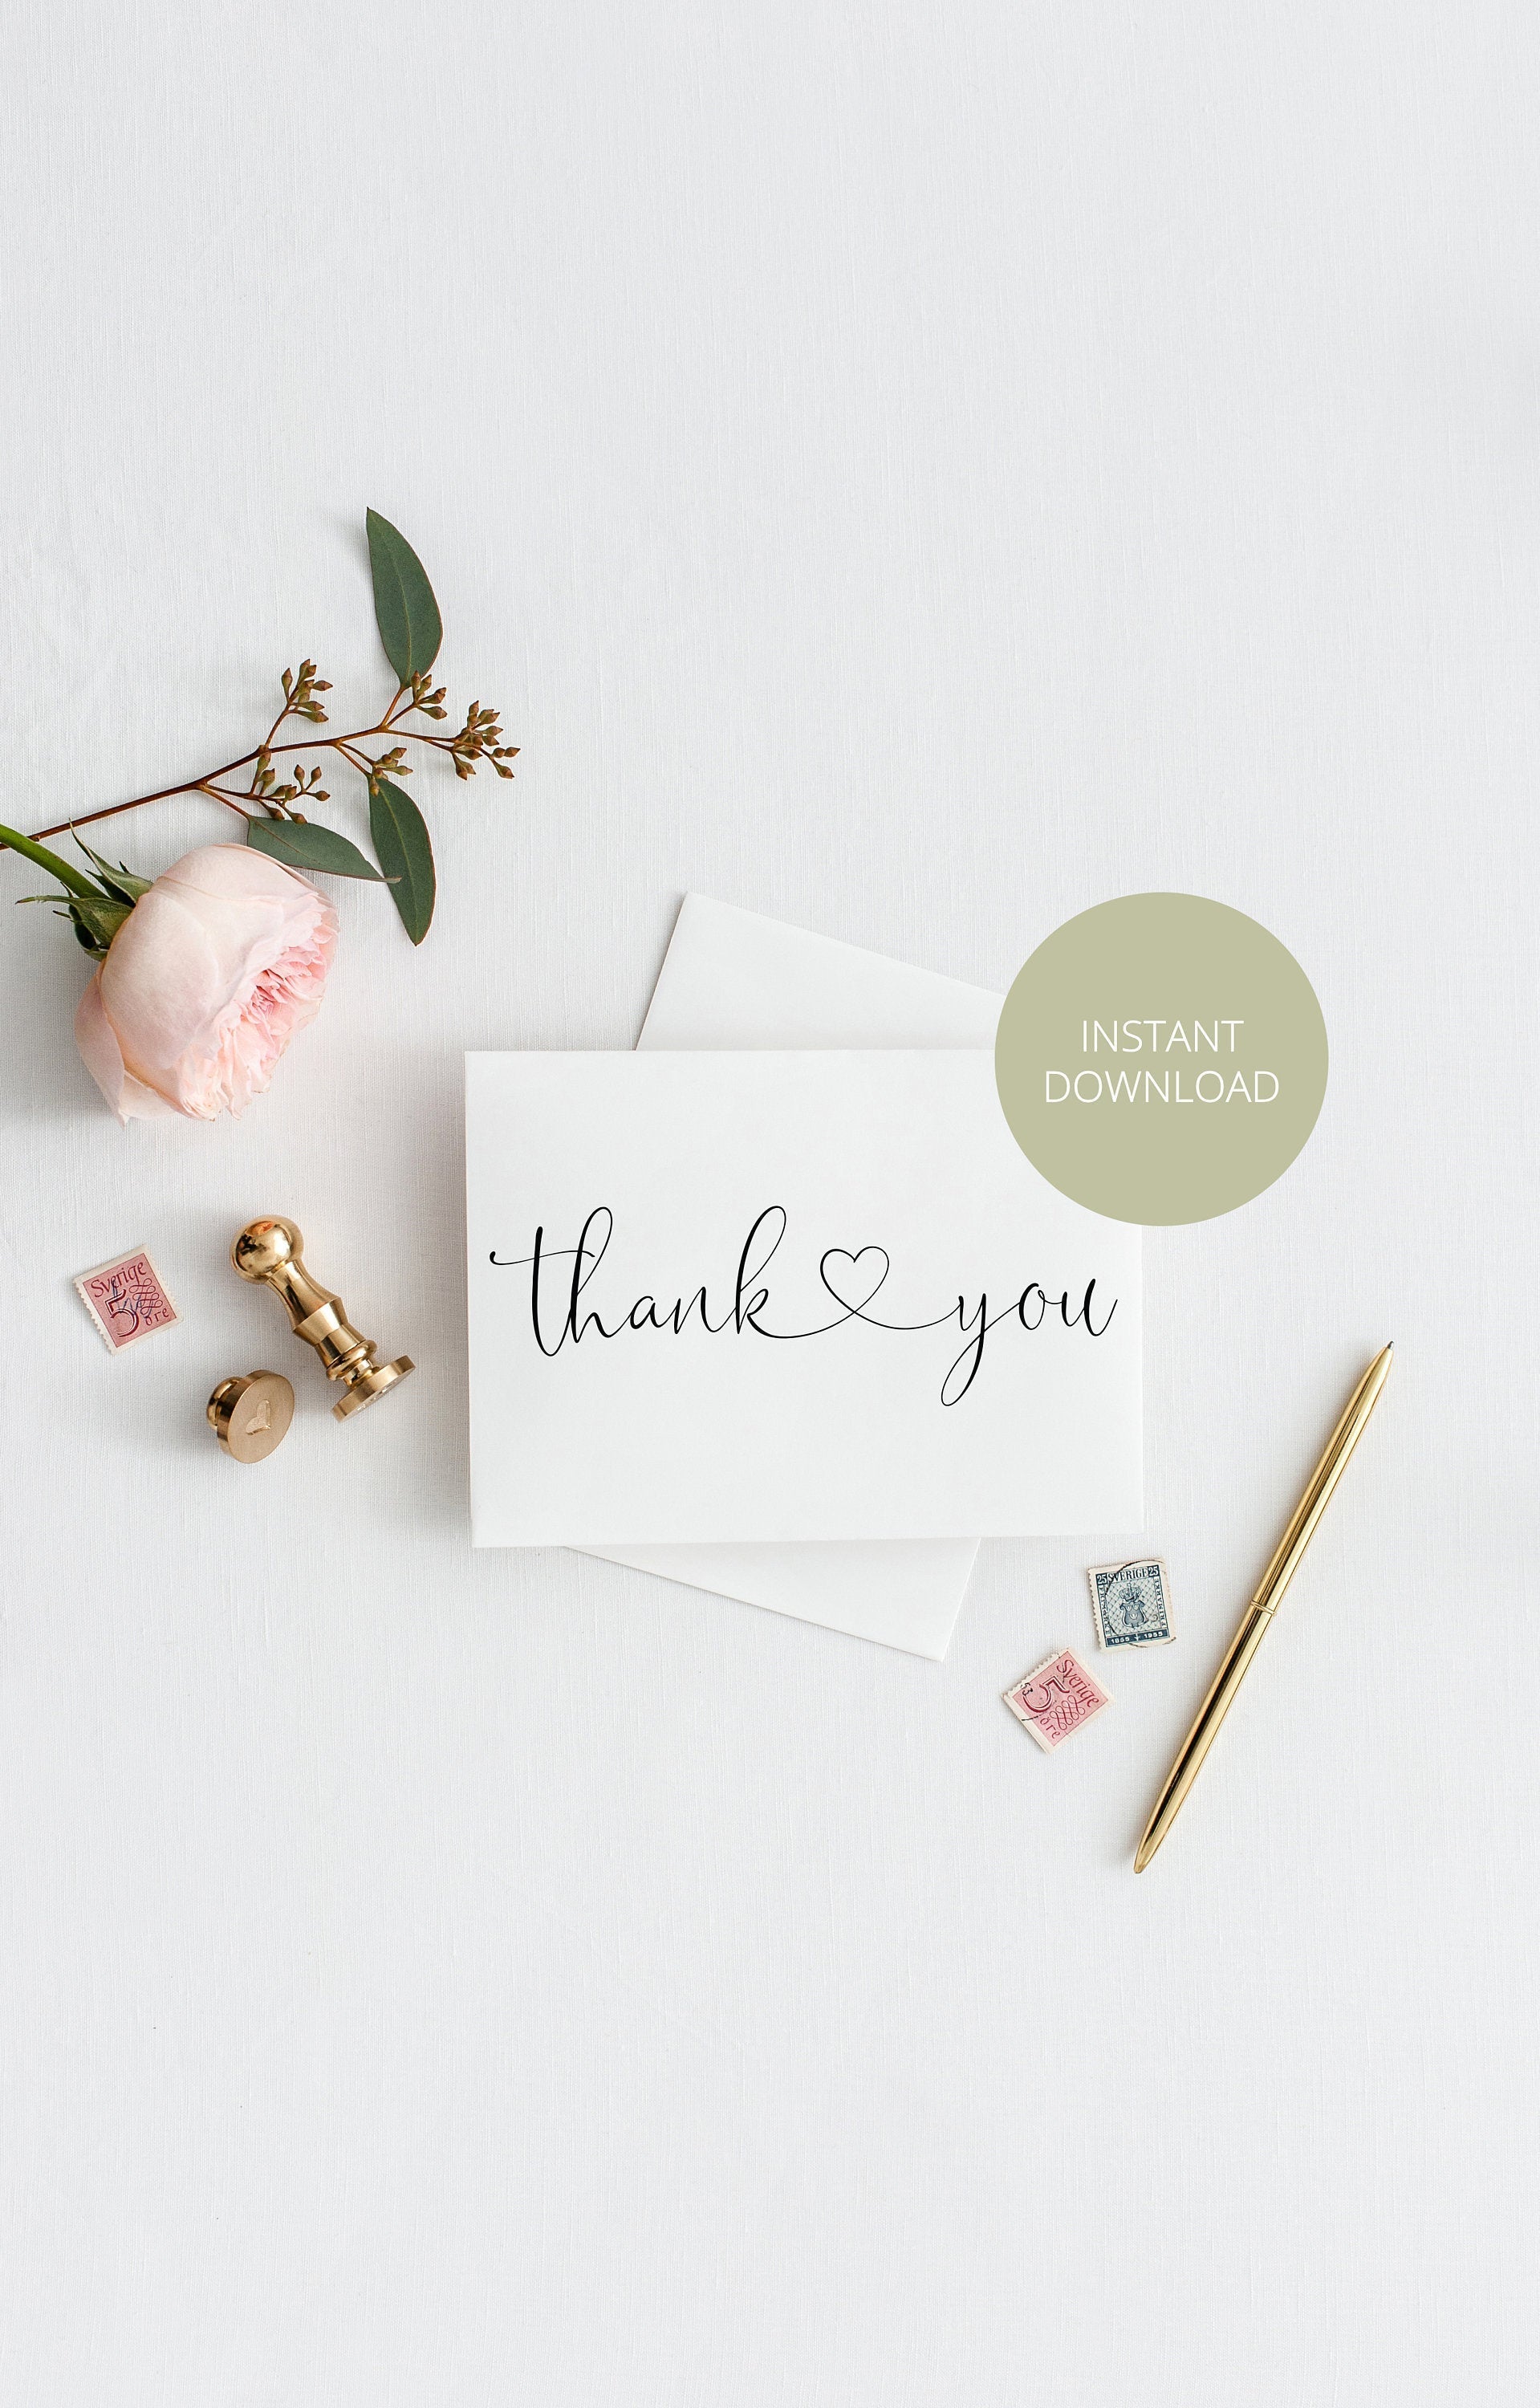 Simple Wedding Thank You Card, Instant Download, Thank you Cards, Printable Thank You, Wedding Cards, Calligraphy, Rustic, Heart  - Heather TAGS | TY | INSERTS SAVVY PAPER CO